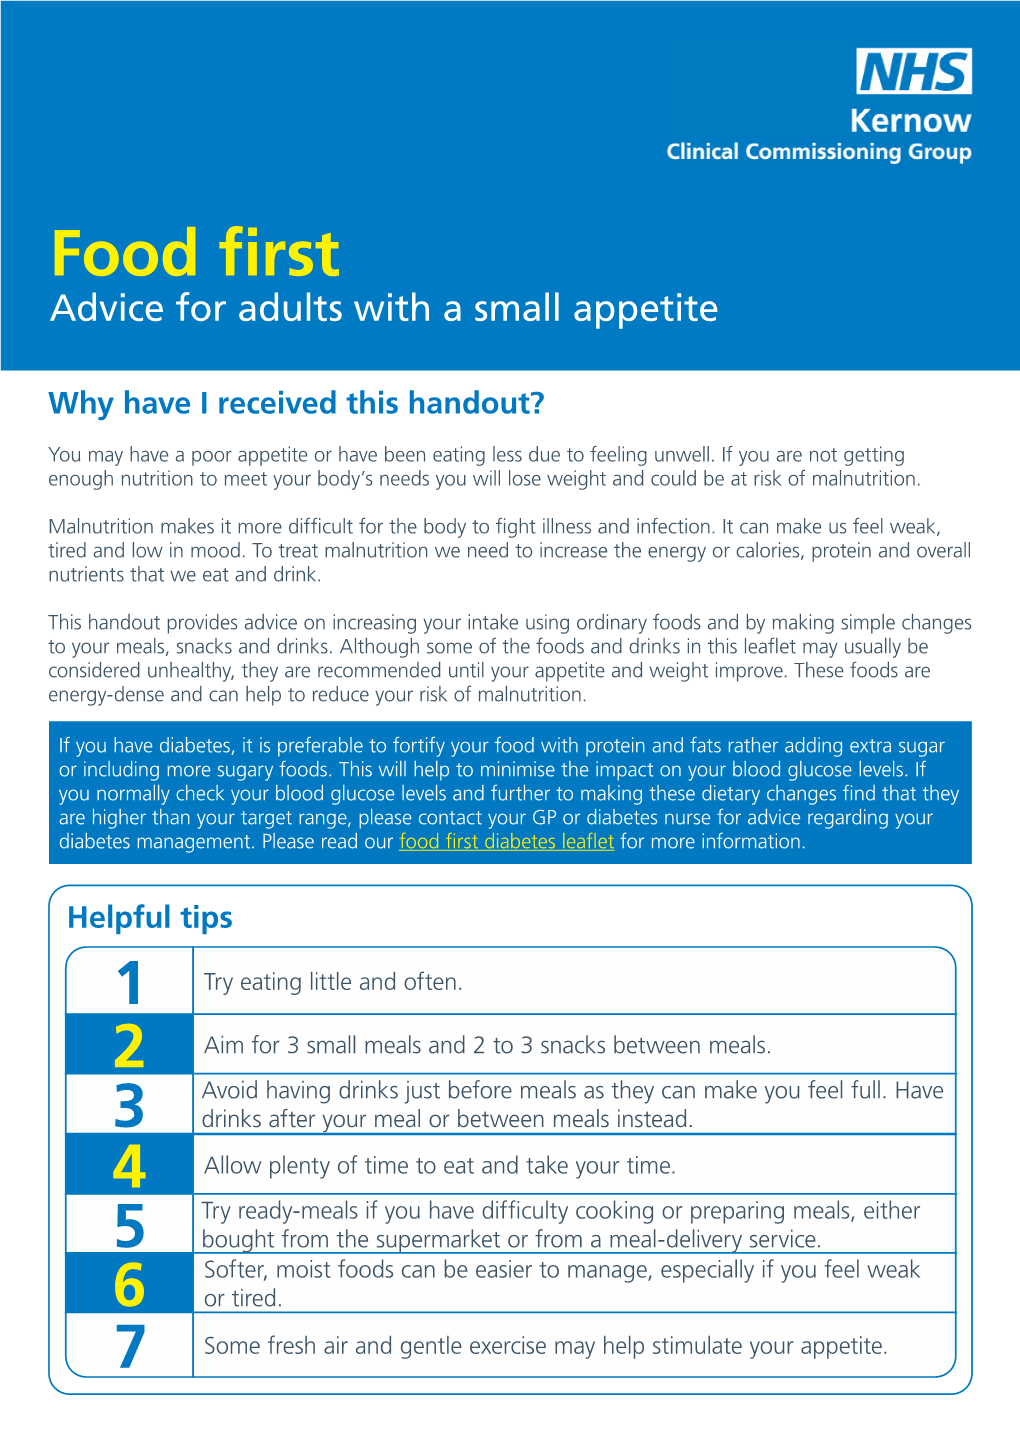 Food First Advice for Adults with a Small Appetite 2021